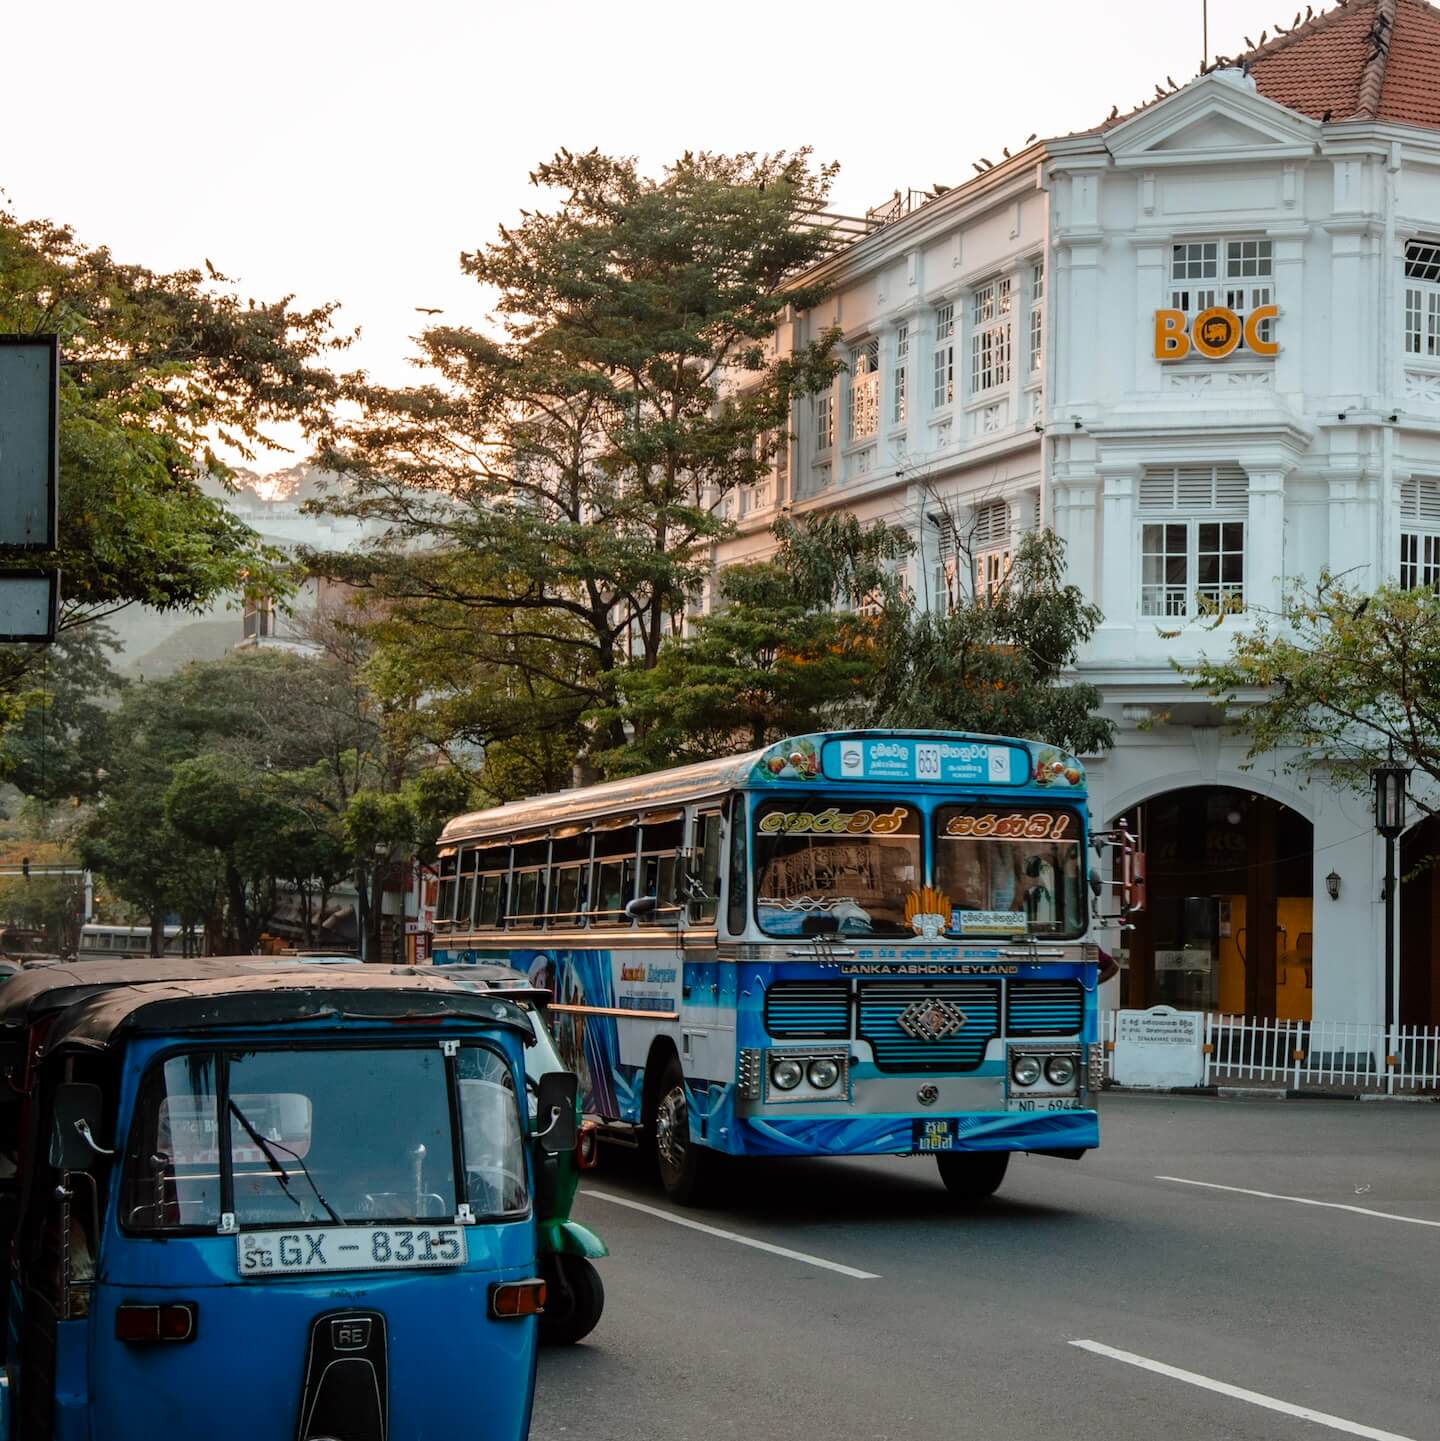 Blue bus and blue tuk tuk on the streets of Kandy in Sri Lanka